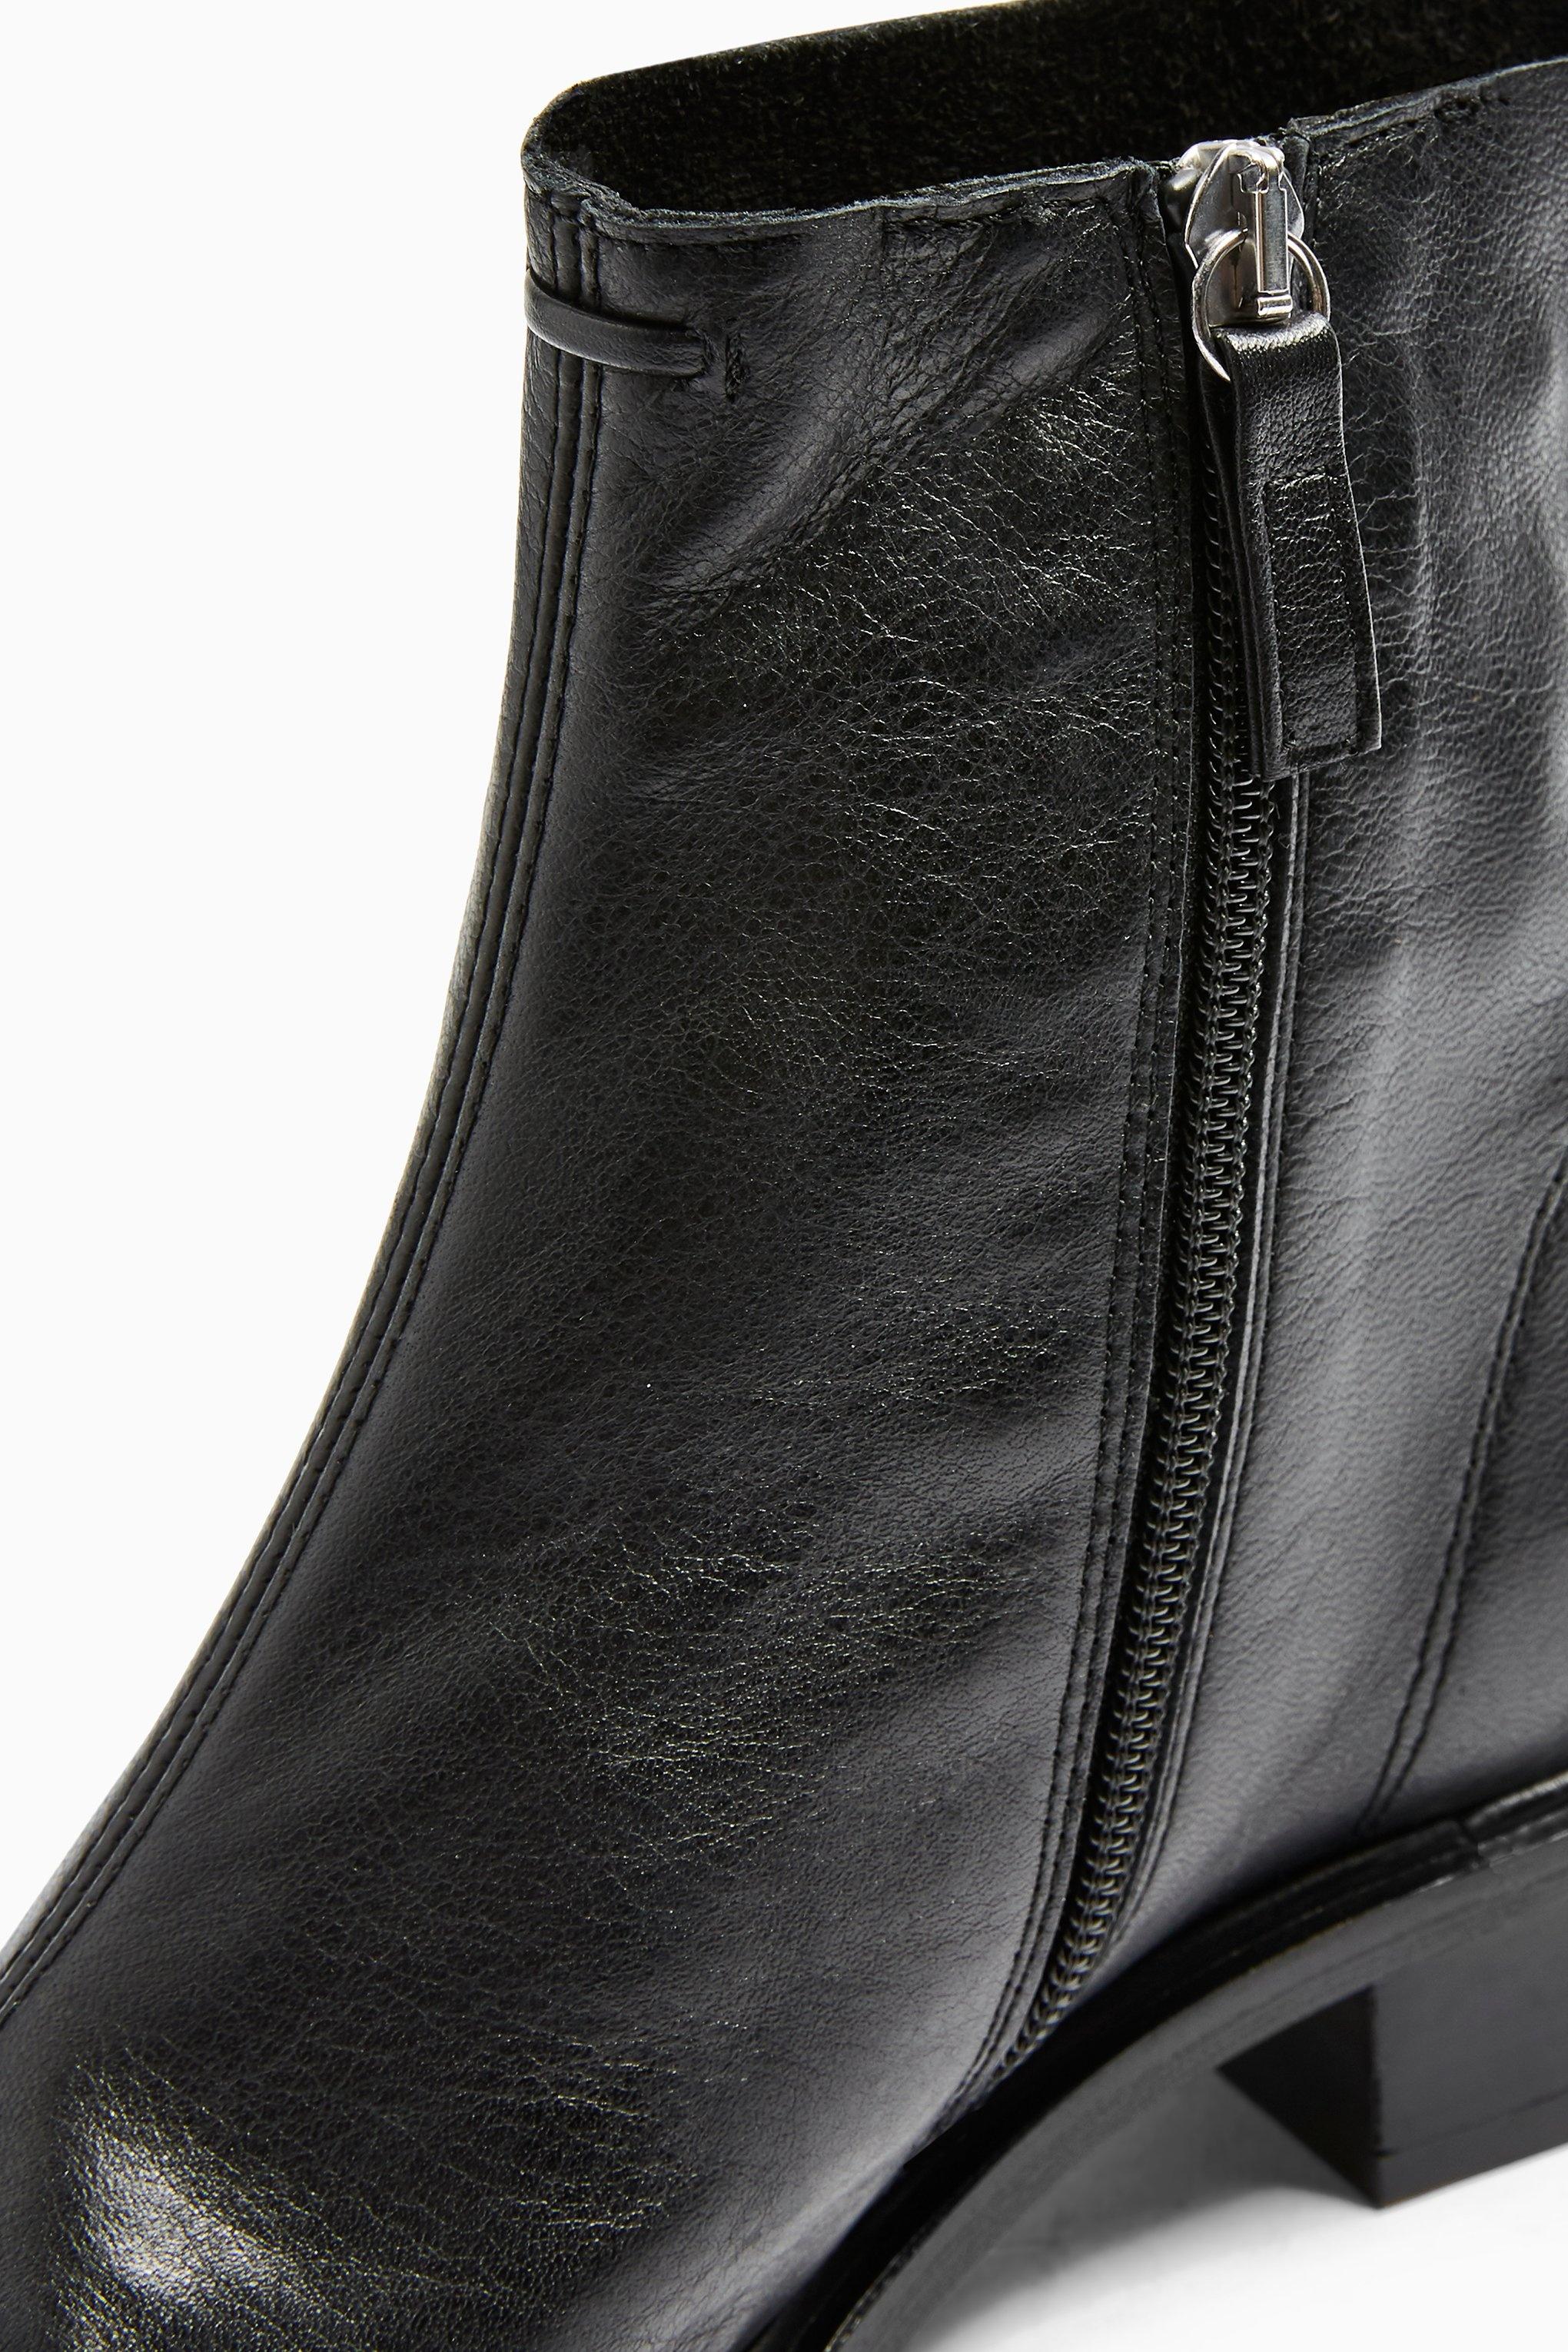 TOPSHOP Arrow Leatherflat Leather Boots 